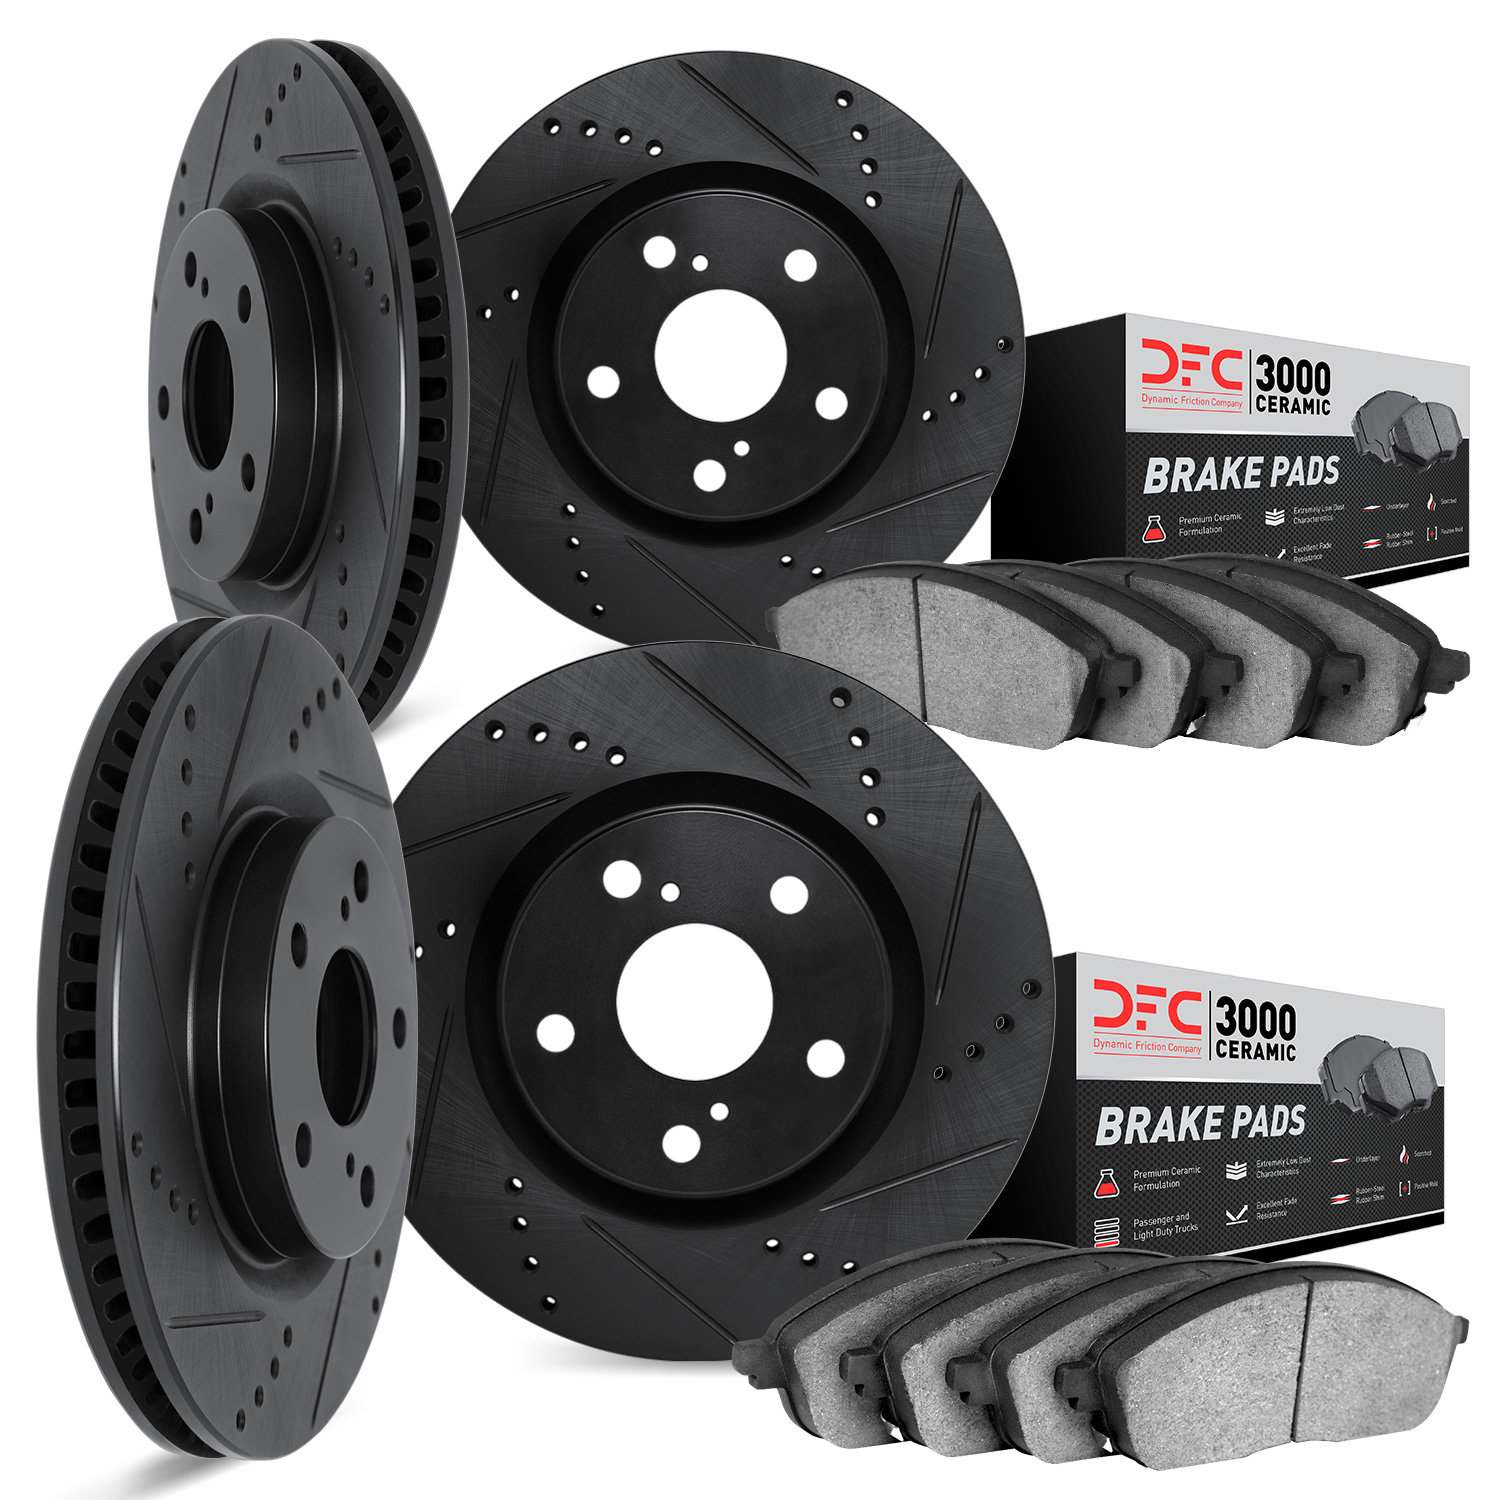 8304-31077 Drilled/Slotted Brake Rotors with 3000-Series Ceramic Brake Pads Kit [Black], 2011-2018 BMW, Position: Front and Rear